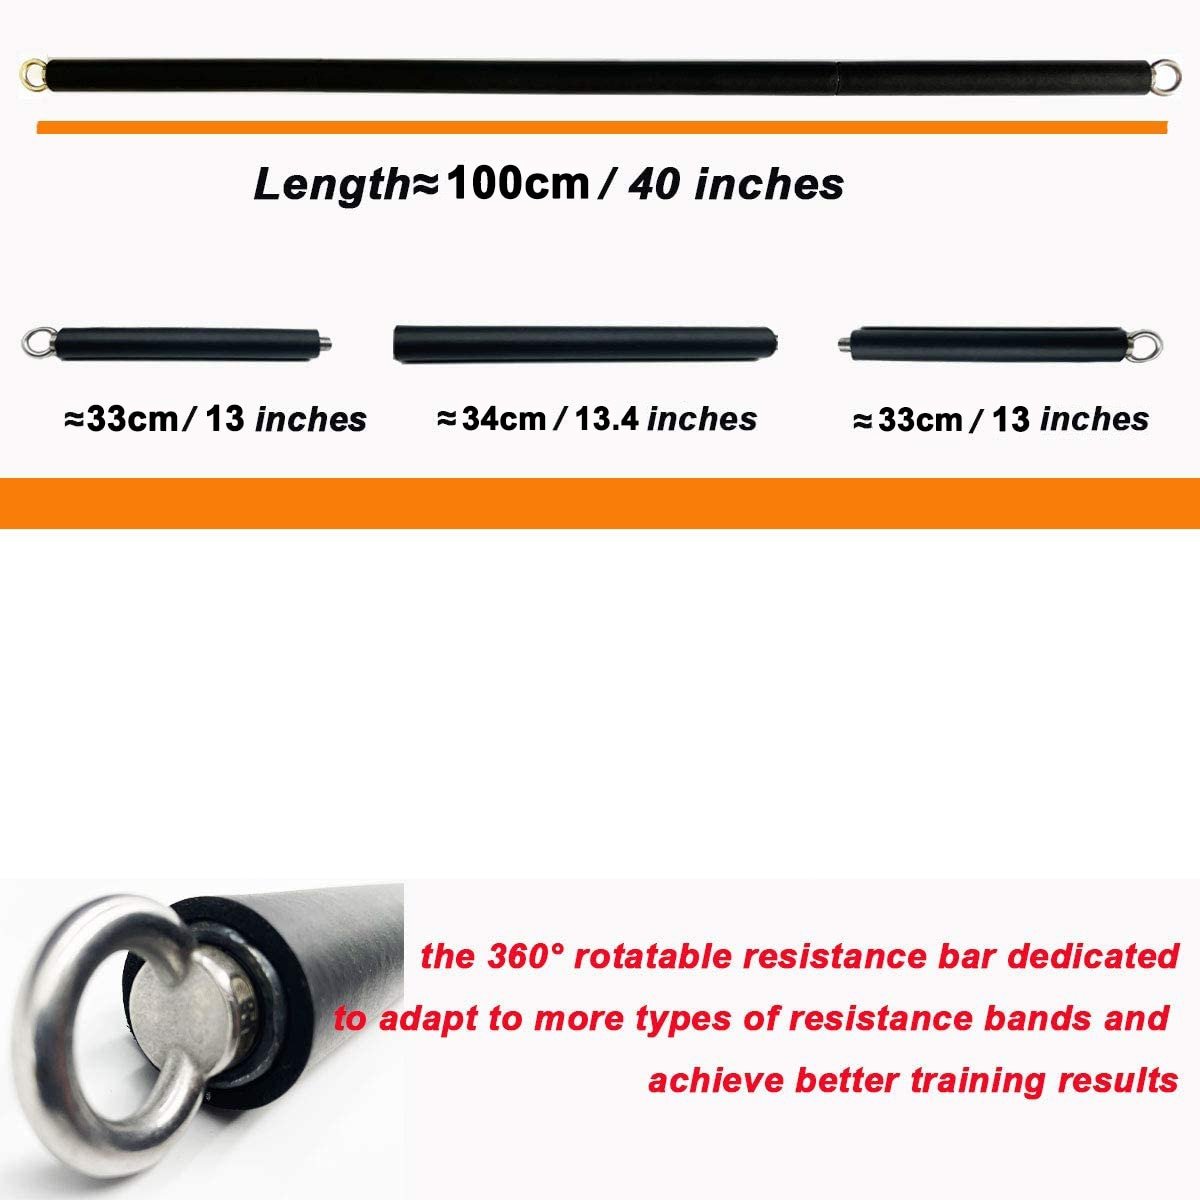 Workout Bar Fitness Resistance Bands Training Expander Gym Equipment - Pride Fire - 654096_CZD1QH4 -